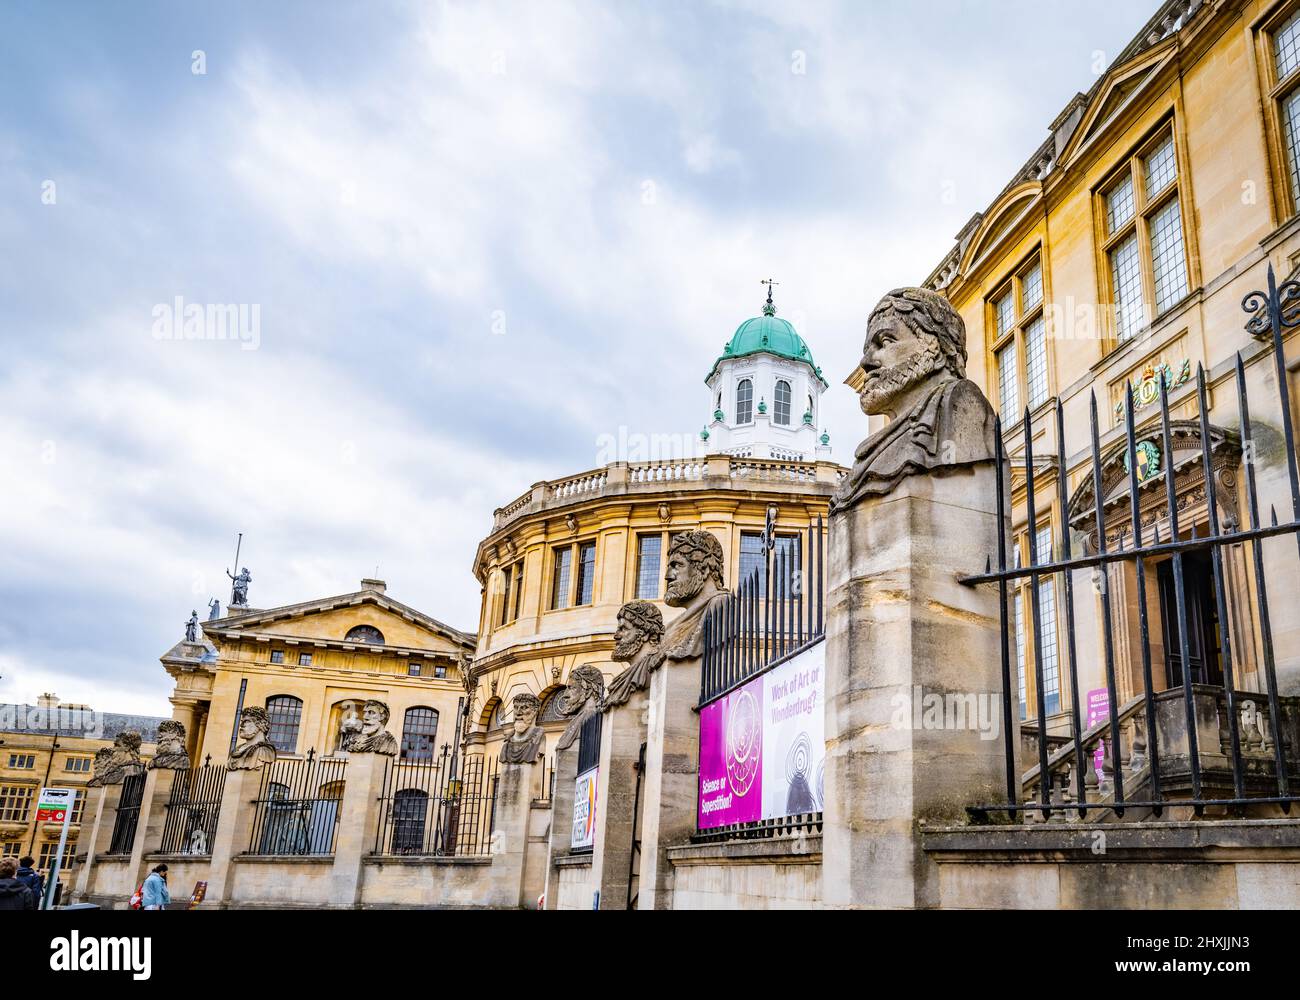 17 Sheldonian emperor heads infront of the History of Science Museum and the Sheldonian Theatre on Broad Street, Oxfor., The 17 stone heads depicting Stock Photo